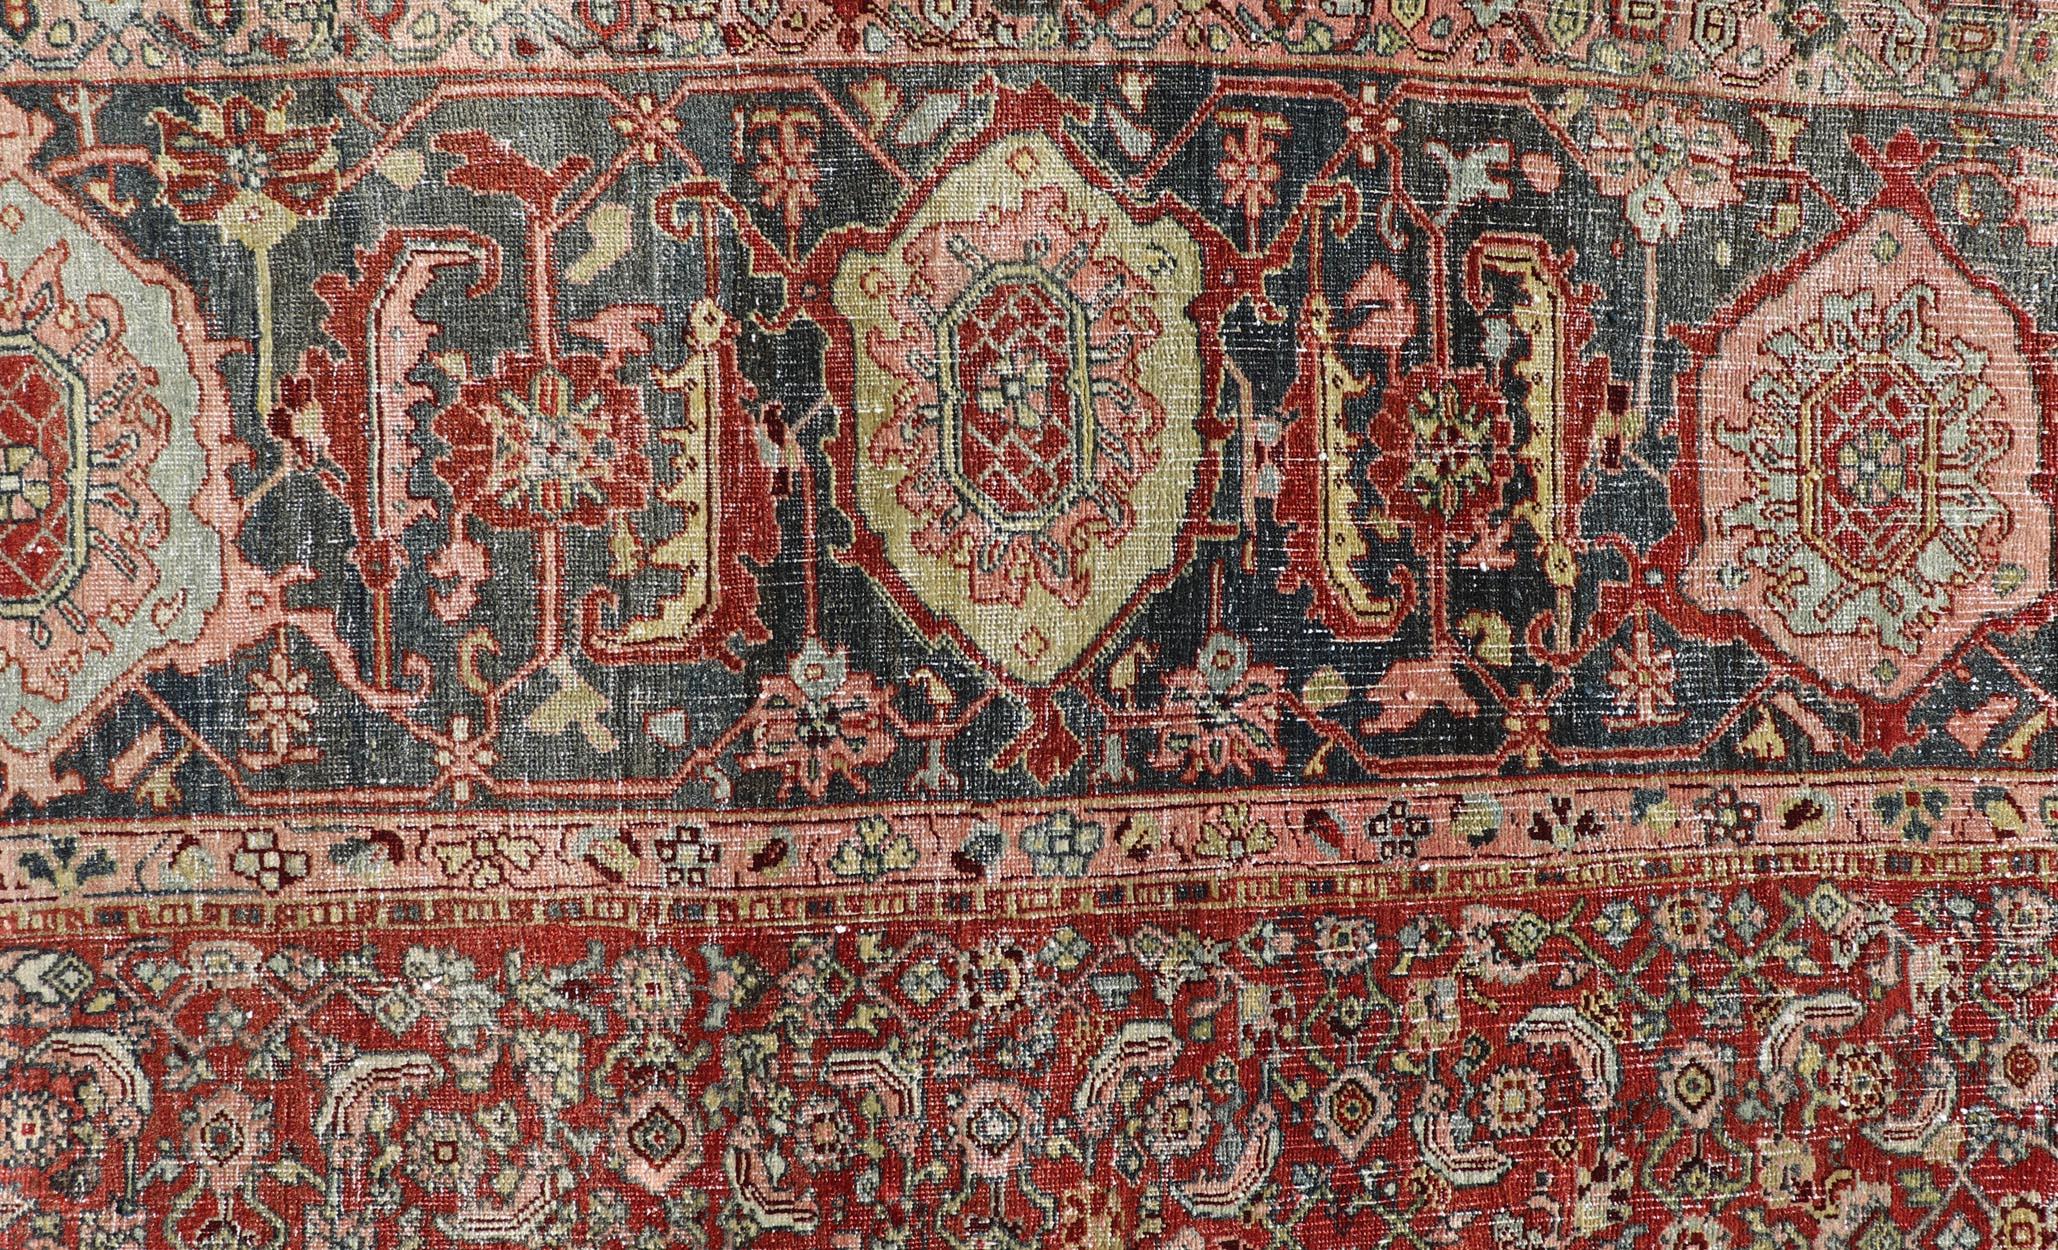 Palace Size Antique Persian Bidjar Rug in Shades of Red, Blue Grey & Lime Green For Sale 8